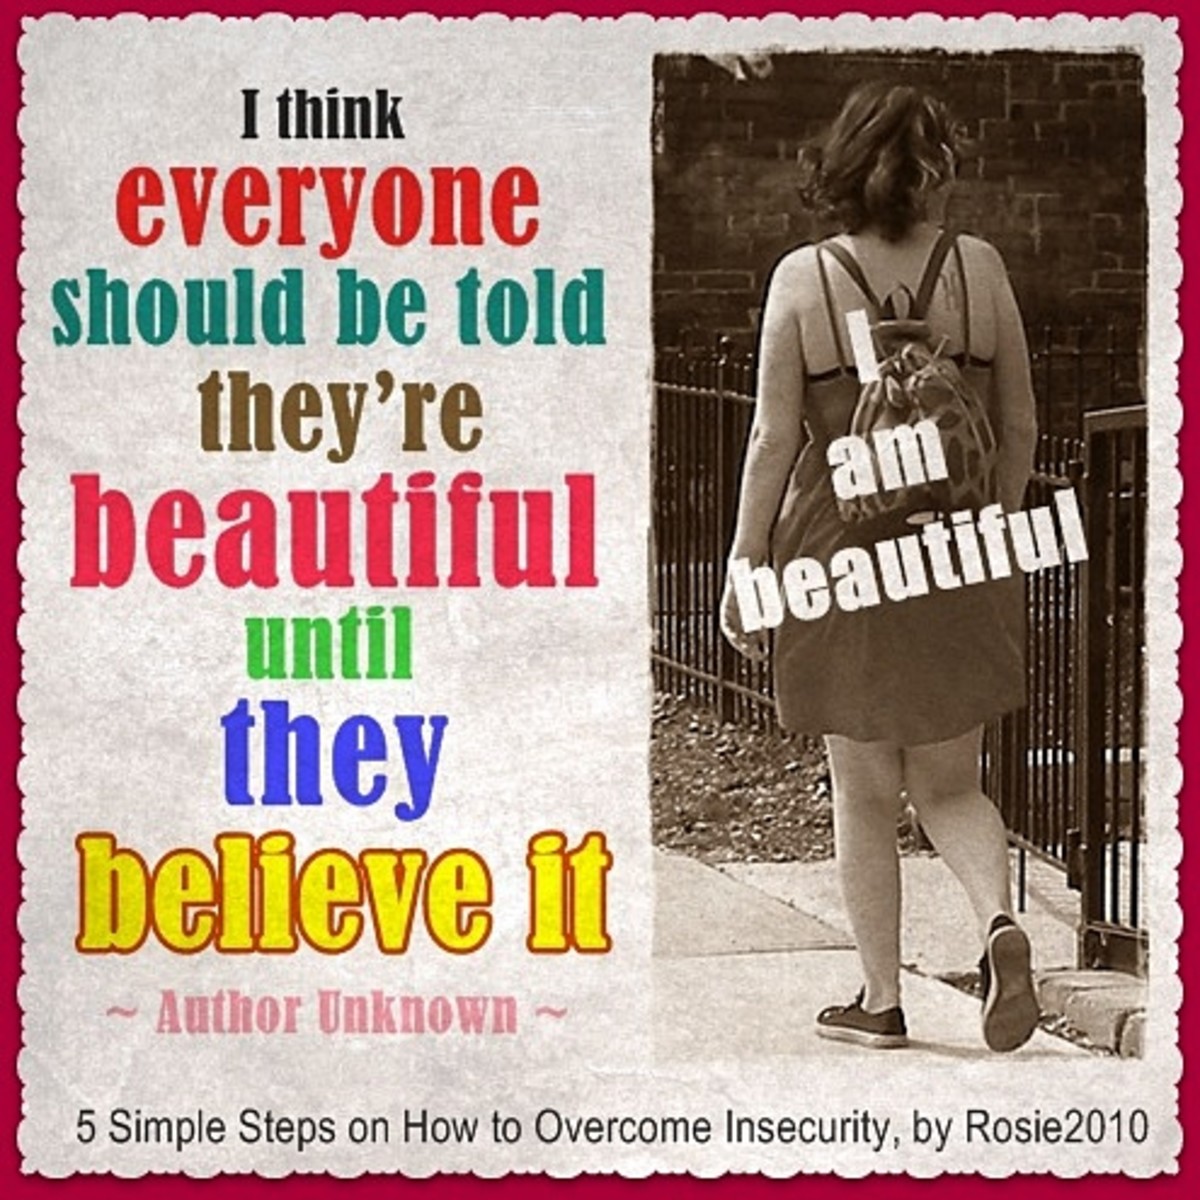 - 5 Simple Steps on How to Overcome Insecurity, by Rosie2010 -